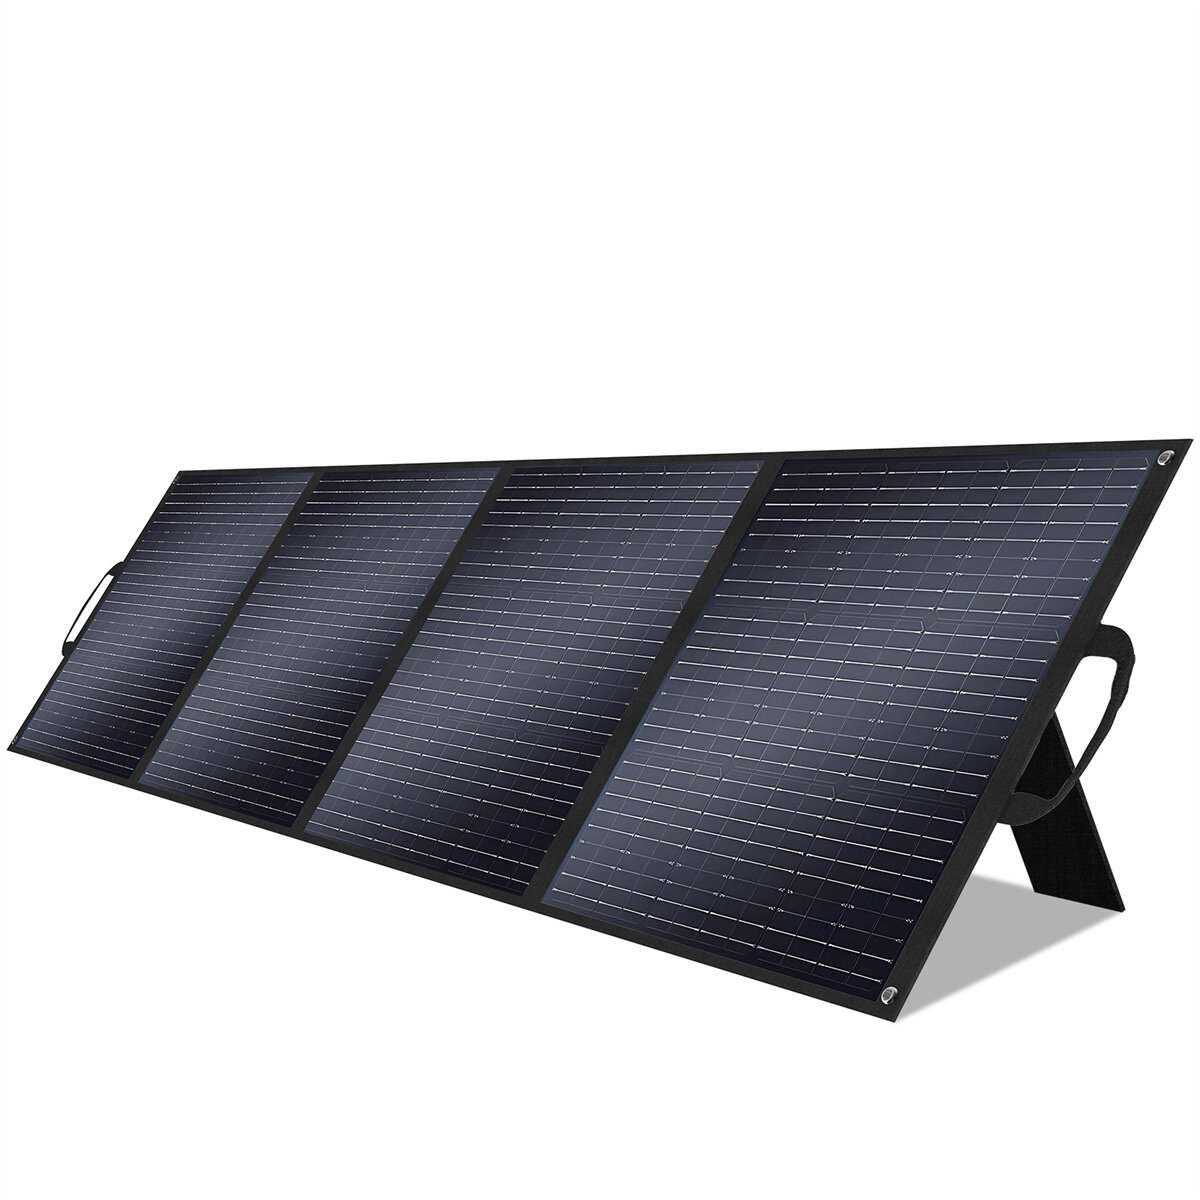 [EU Direct] 1Pc VLAIAN S200 200W ETFE Solar Panel 23.4% Efficiency Portable Foldable Solar Panel for Patio, RV, Outdoors Camping, Power Outage, Emergency